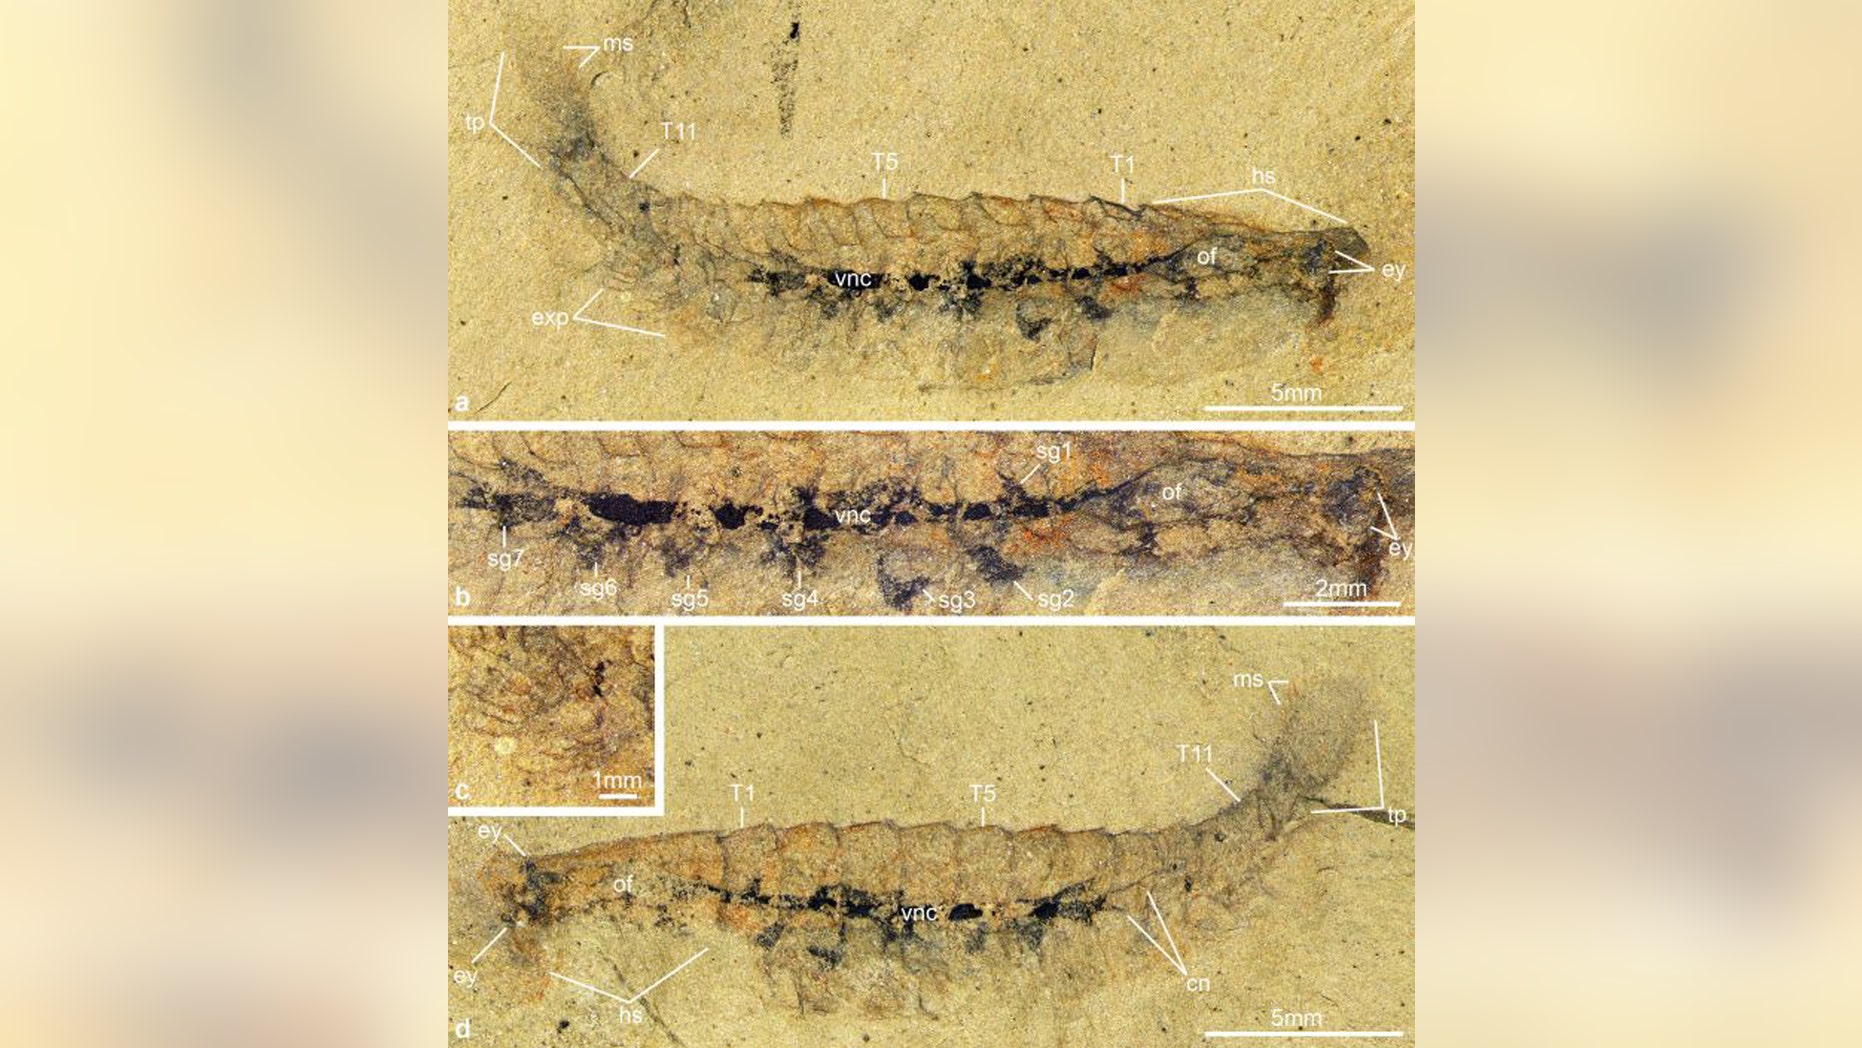 A newfound Alalcomenaeus fossil from the western U.S. contains remnants of a nervous system (black stain). (Credit: Ortega-Hernández et al. 2019)